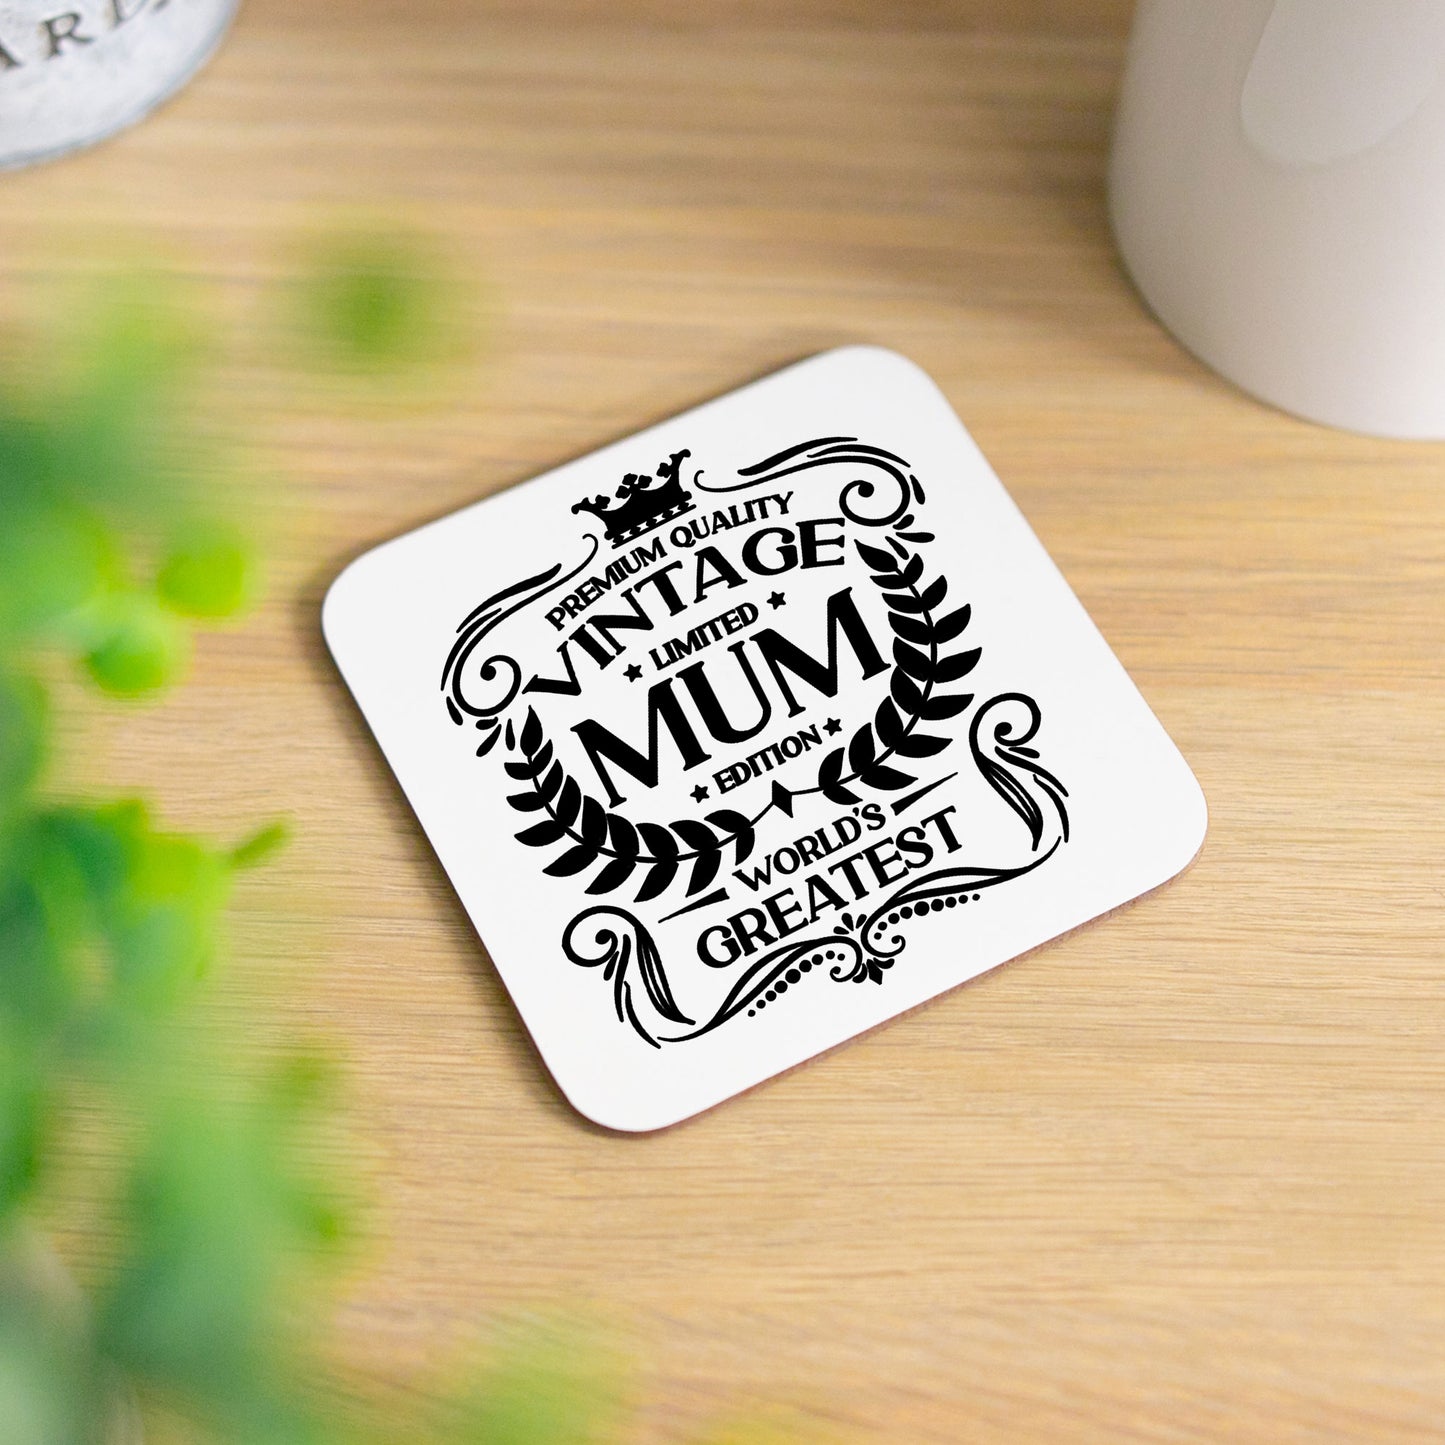 Vintage Worlds Greatest Mum Mug and/or Coaster  - Always Looking Good - Printed Coaster On Its Own  